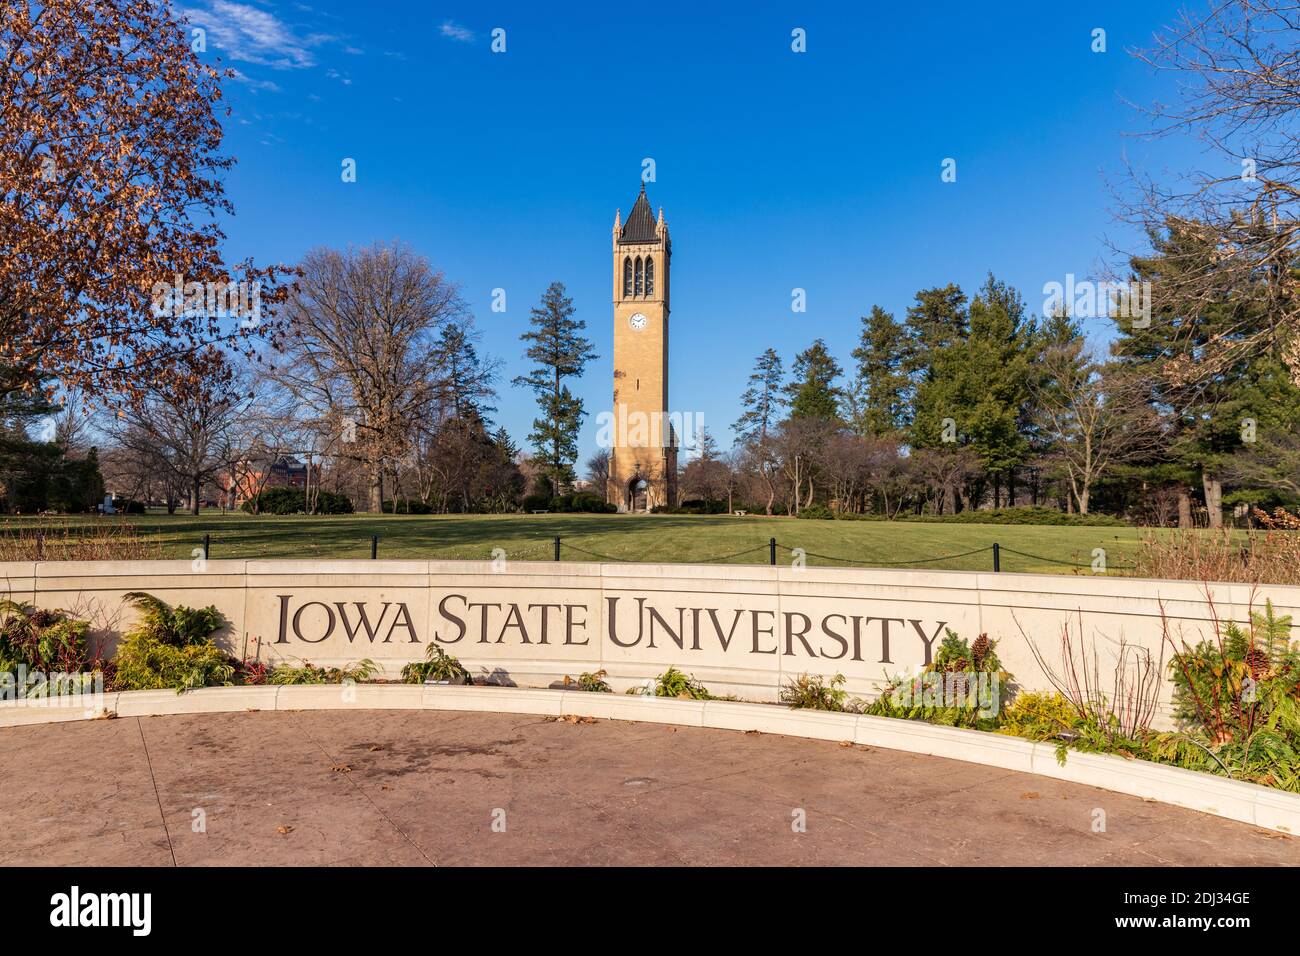 Ames, IA, USA - December 4, 2020: Iowa State University sign in front of the campanile Stock Photo